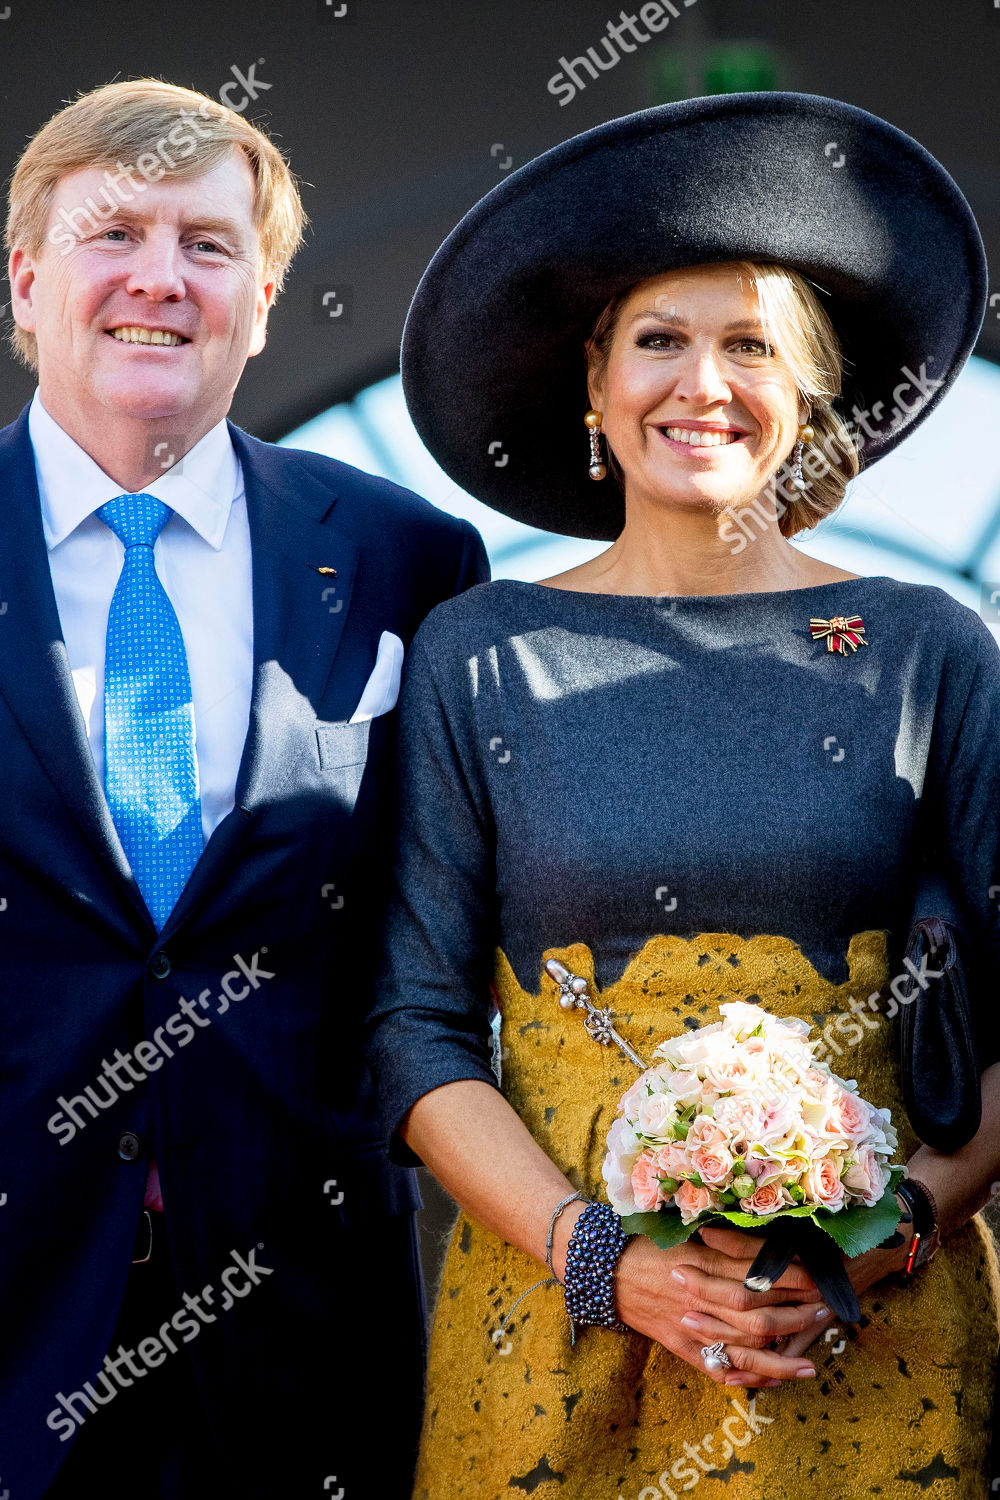 king-willem-alexander-and-queen-maxima-visit-to-germany-shutterstock-editorial-9921319v.jpg